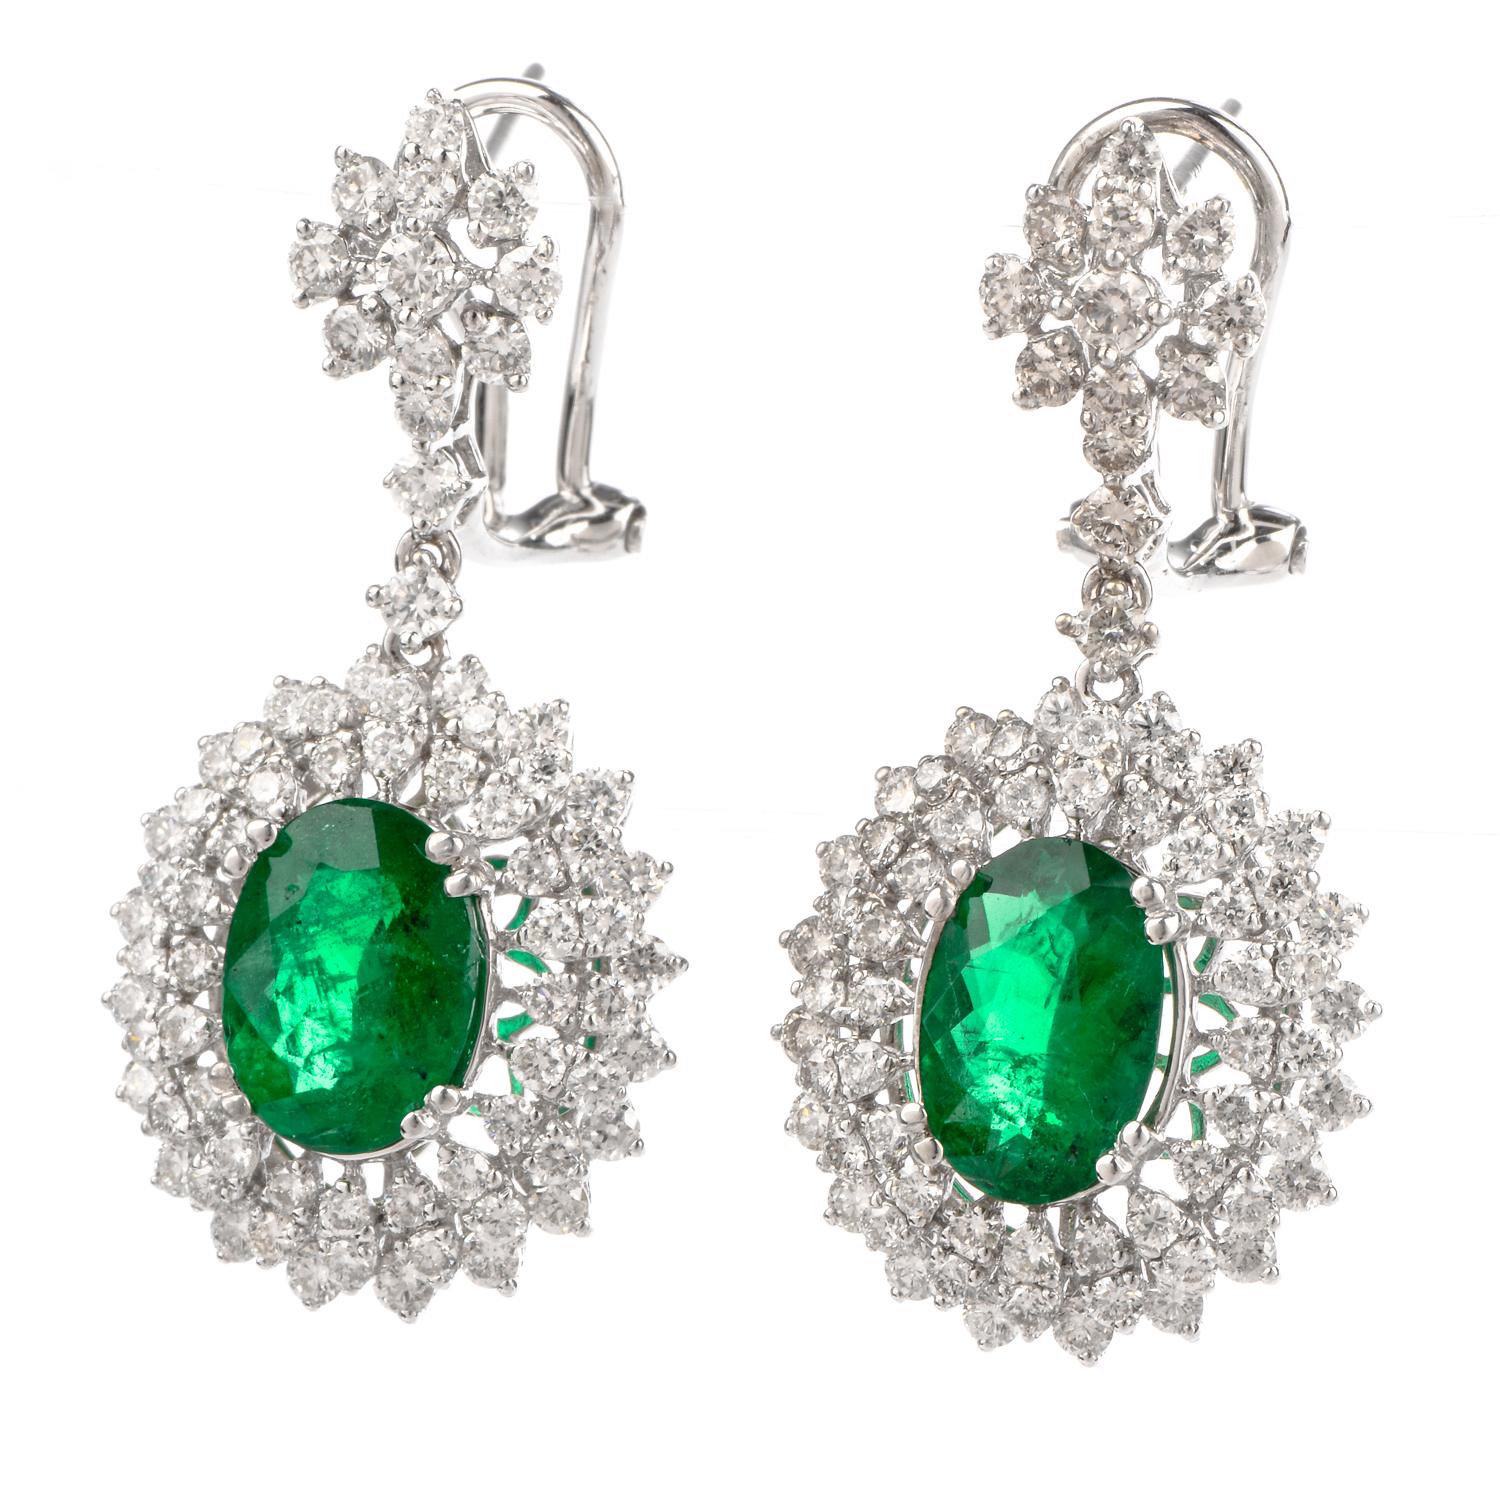 These stunning diamond and emerald dangle drop earrings are crafted in solid 18 karat white gold. Displaying a pair of prominent oval shaped prong-set emeralds, collectively weighing, 3.02 carats. Surrounded by a approx. 146 round-cut diamonds,